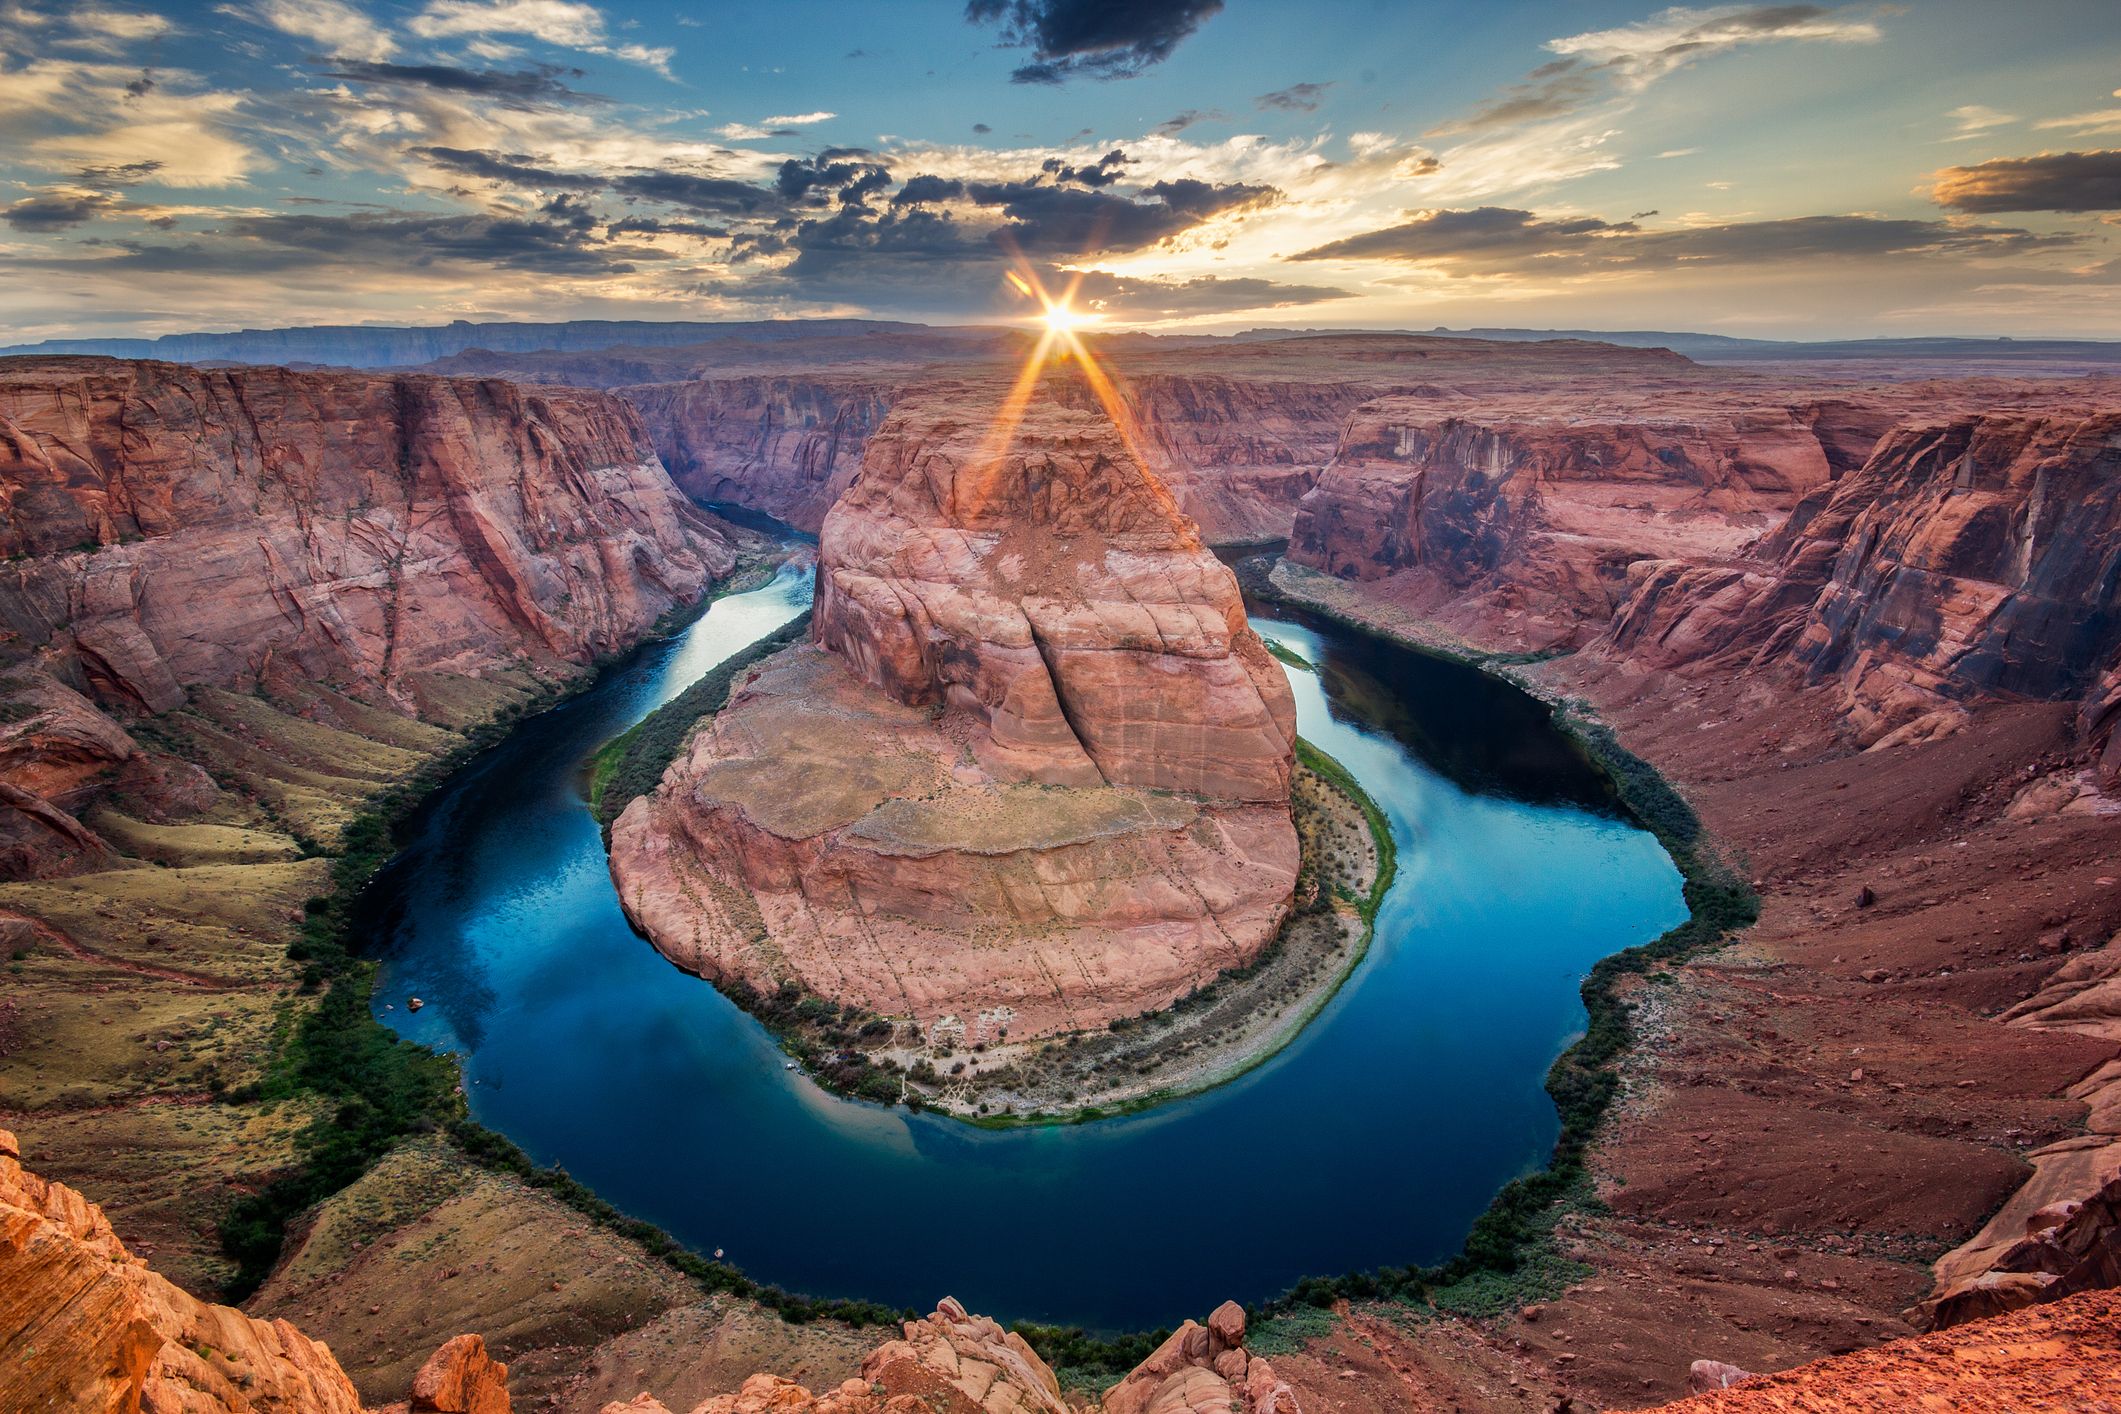 How long would it take to fill the Grand Canyon?